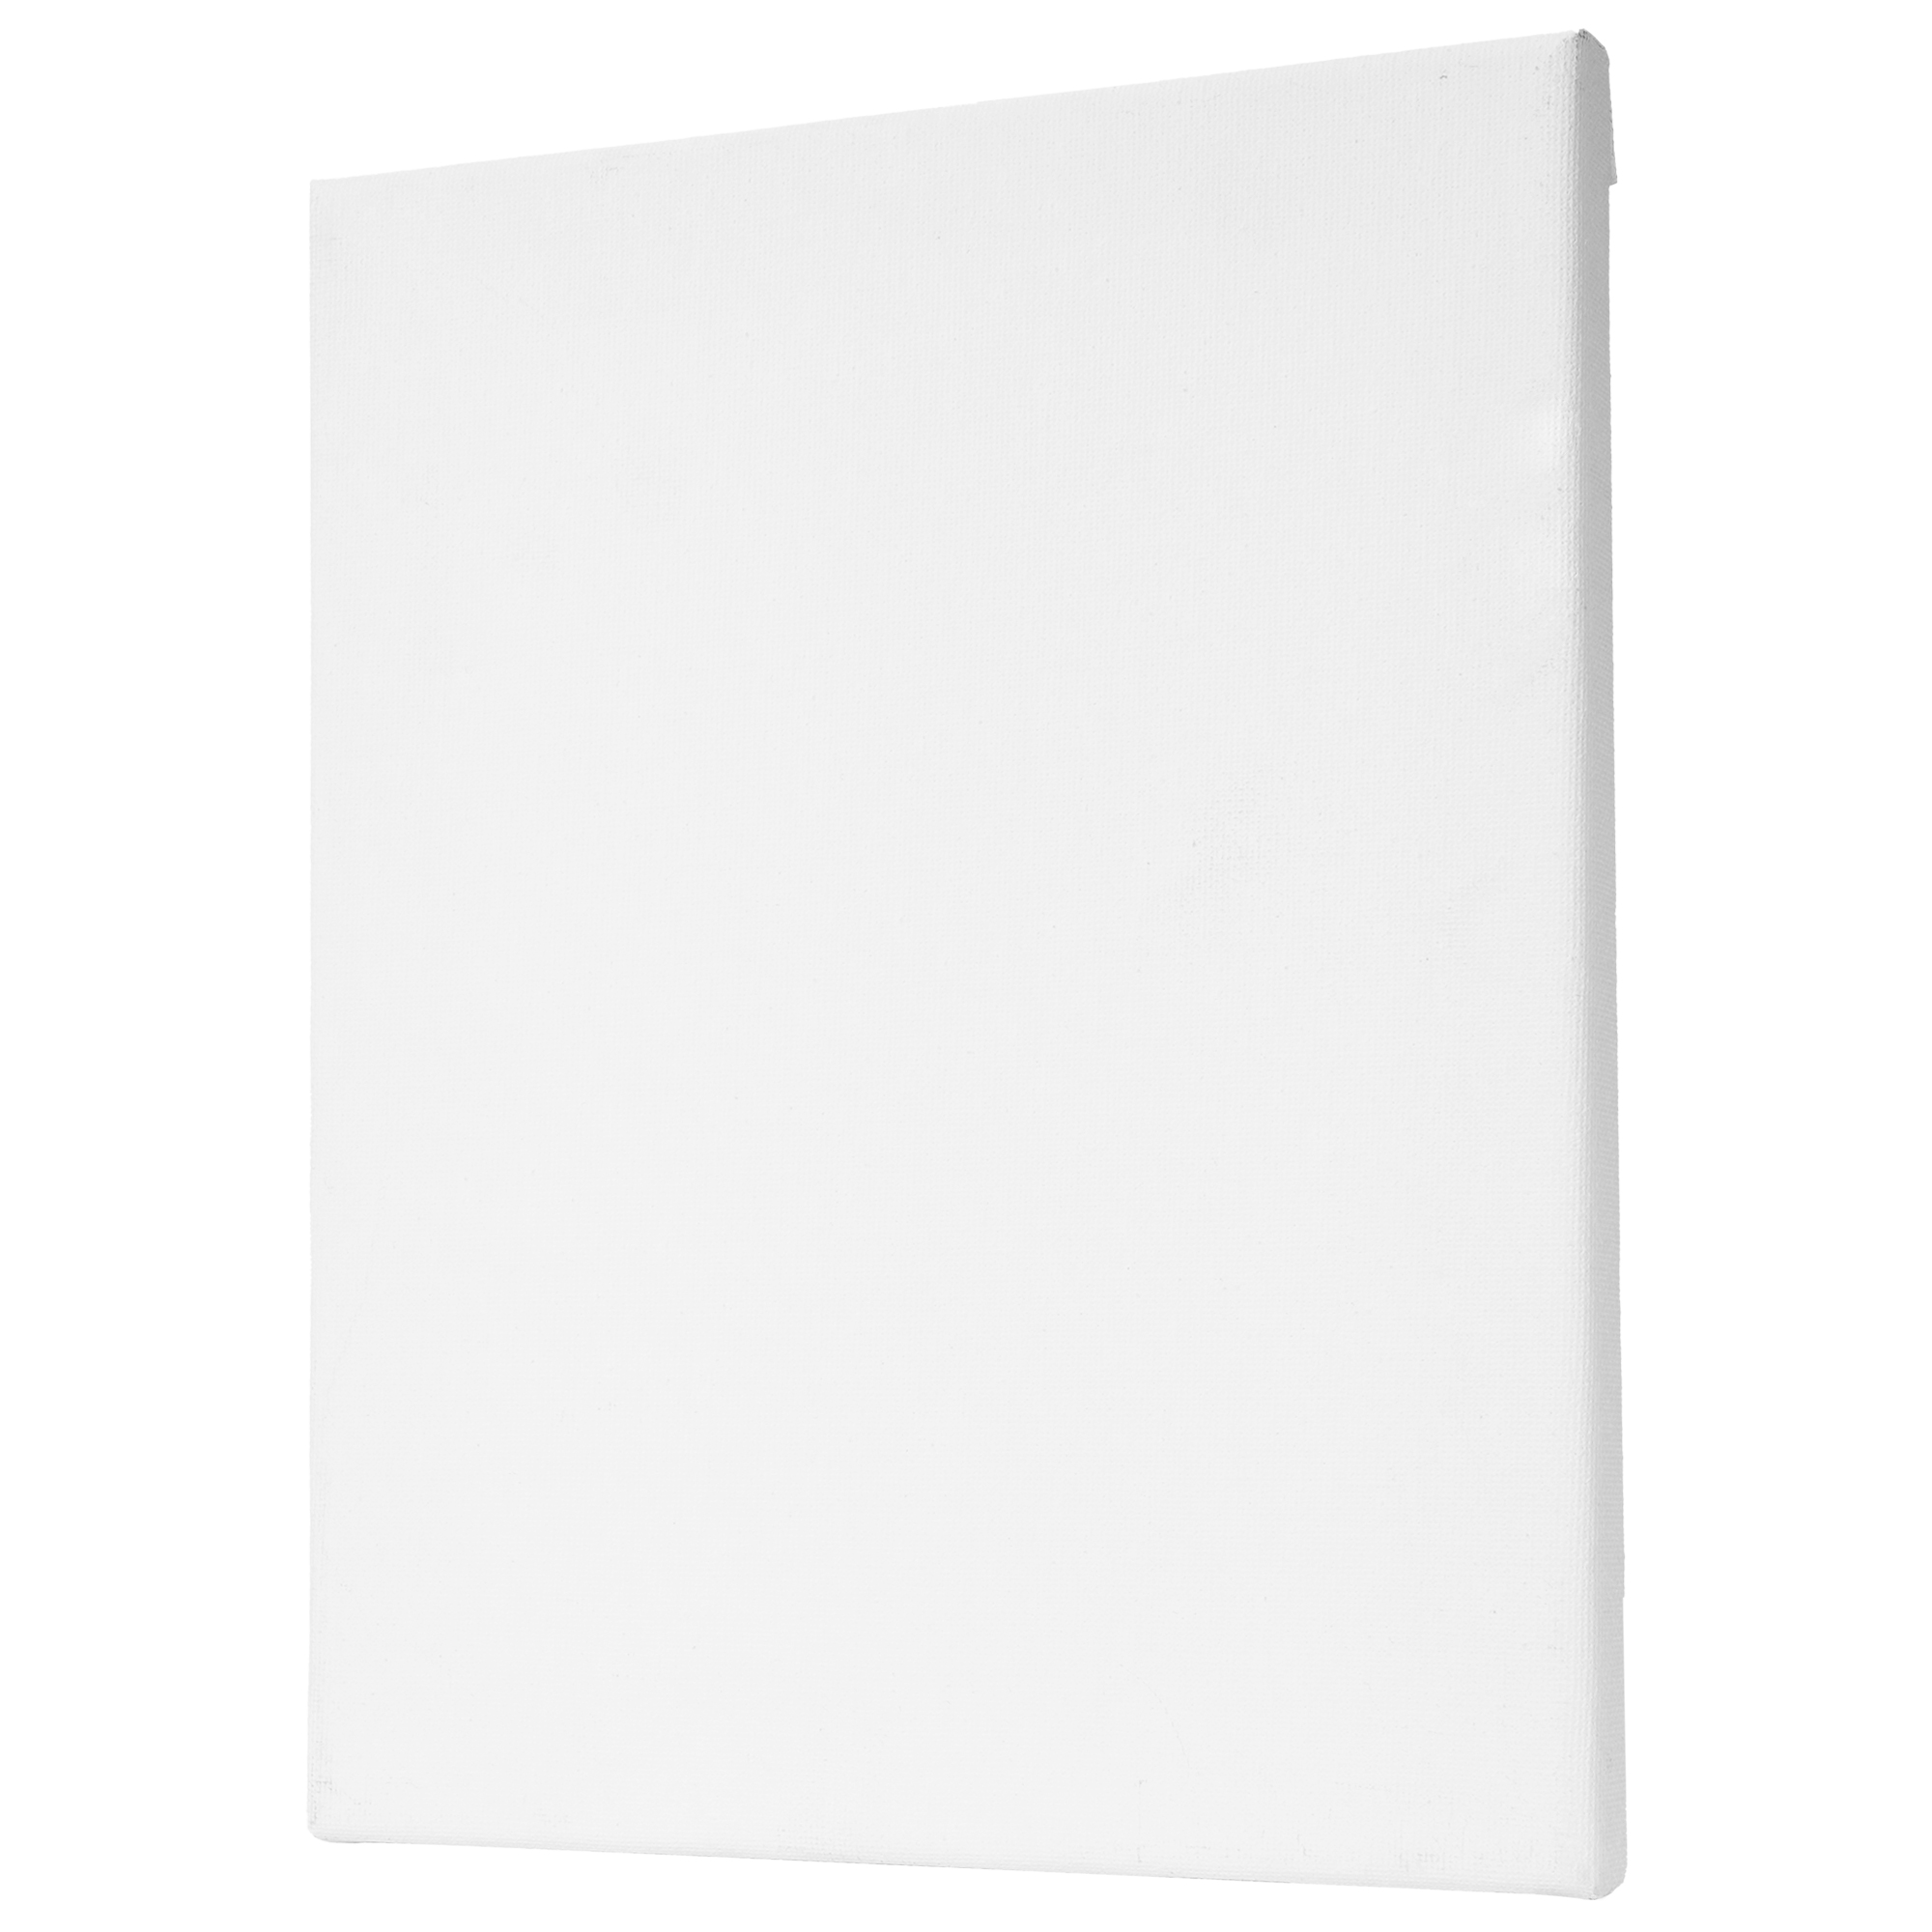 PHOENIX White Stretched Canvas 8x10 inch / 10 Pack 100% Cotton